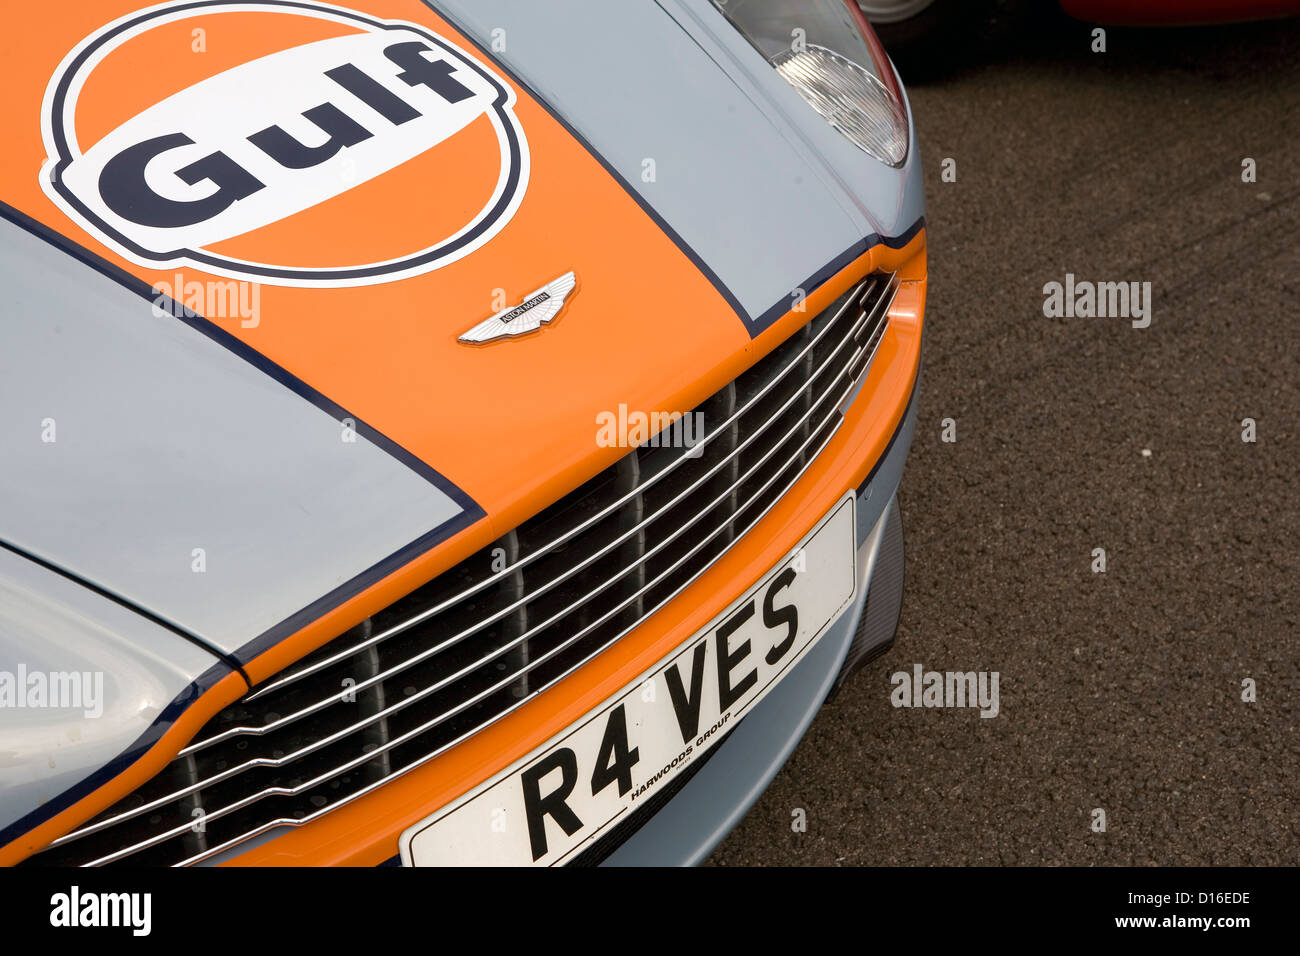 The front of a modern Aston Martin supercar in Gulf coloured livery. Stock Photo